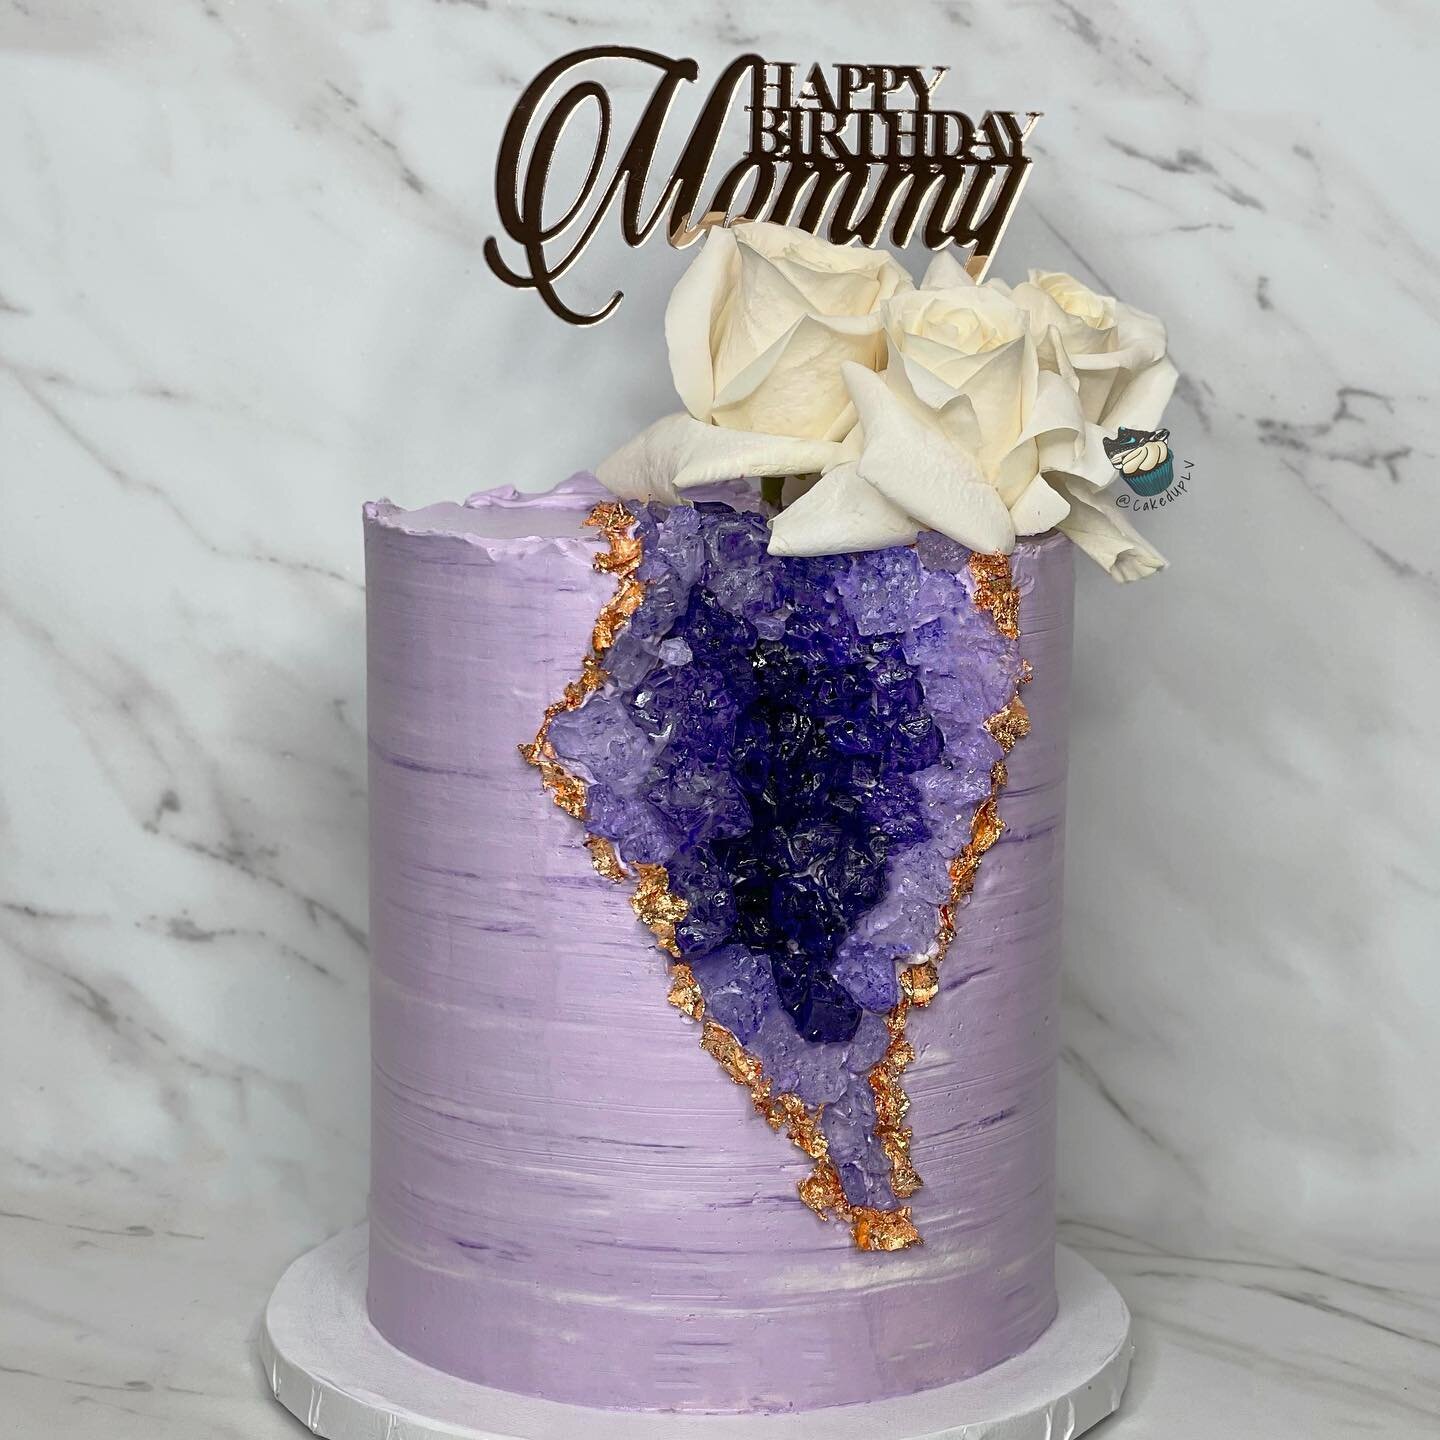 For those of you in my close friends group&hellip;🤣😉

Topper by @happyhourslv 
Foiling by @sprinklesbygcc 

&bull;

#amethyst #purplegemstone #purplecake #texturedcake #tequila #casamigostequila #geodecakes #geodecake #geodes #strawberryshortcake #